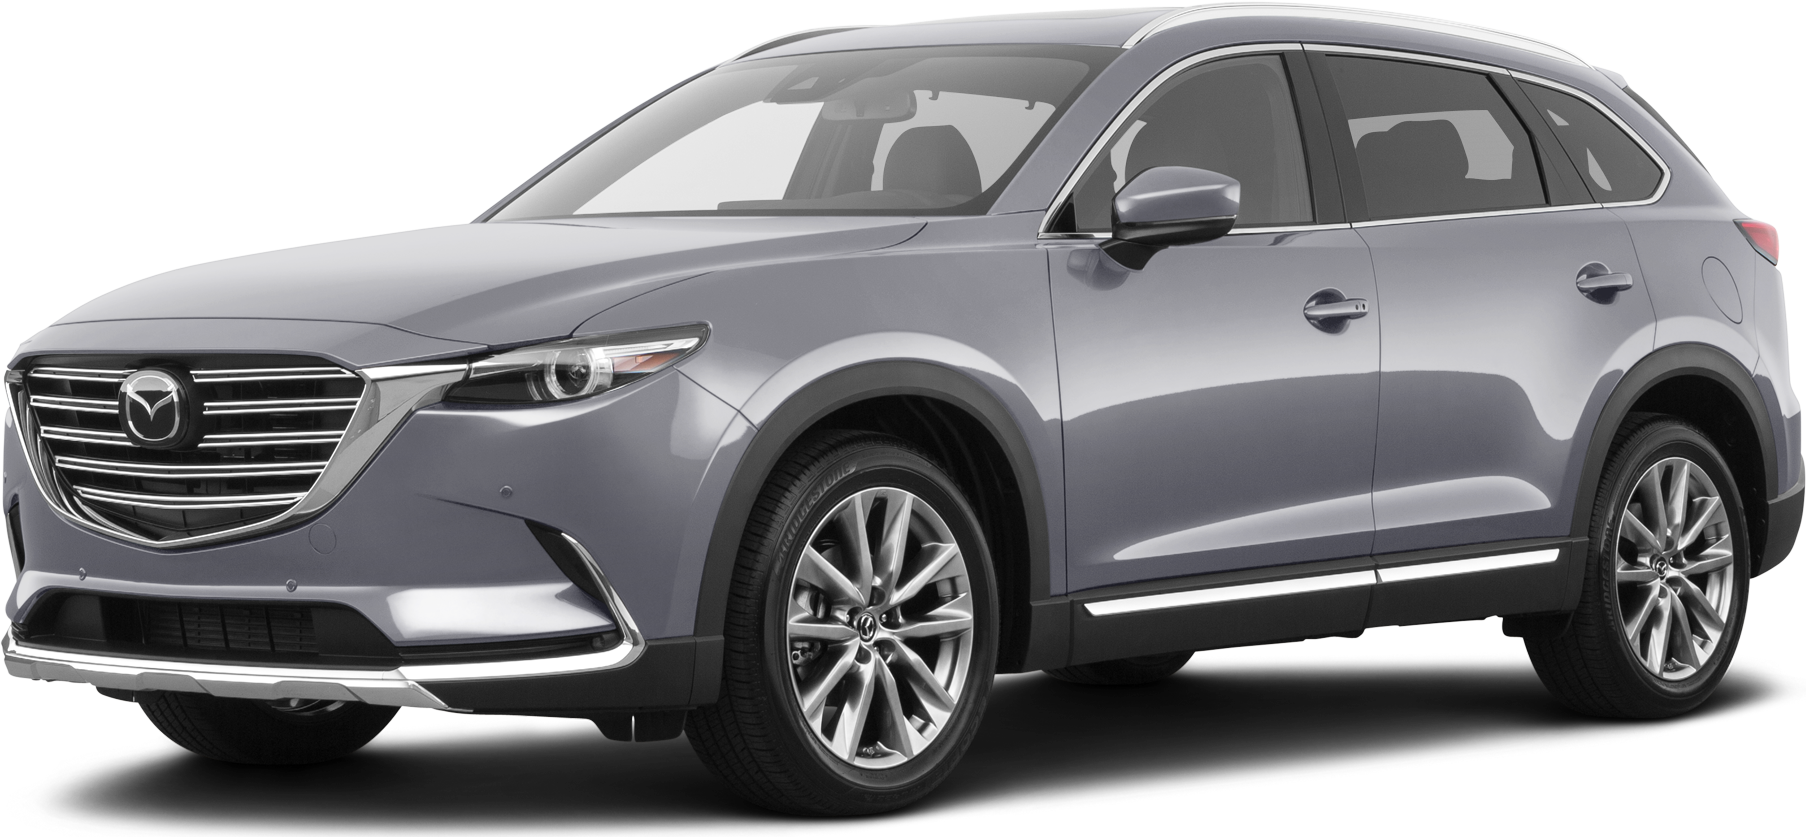 2018 Mazda Cx 9 Price Value Ratings And Reviews Kelley Blue Book